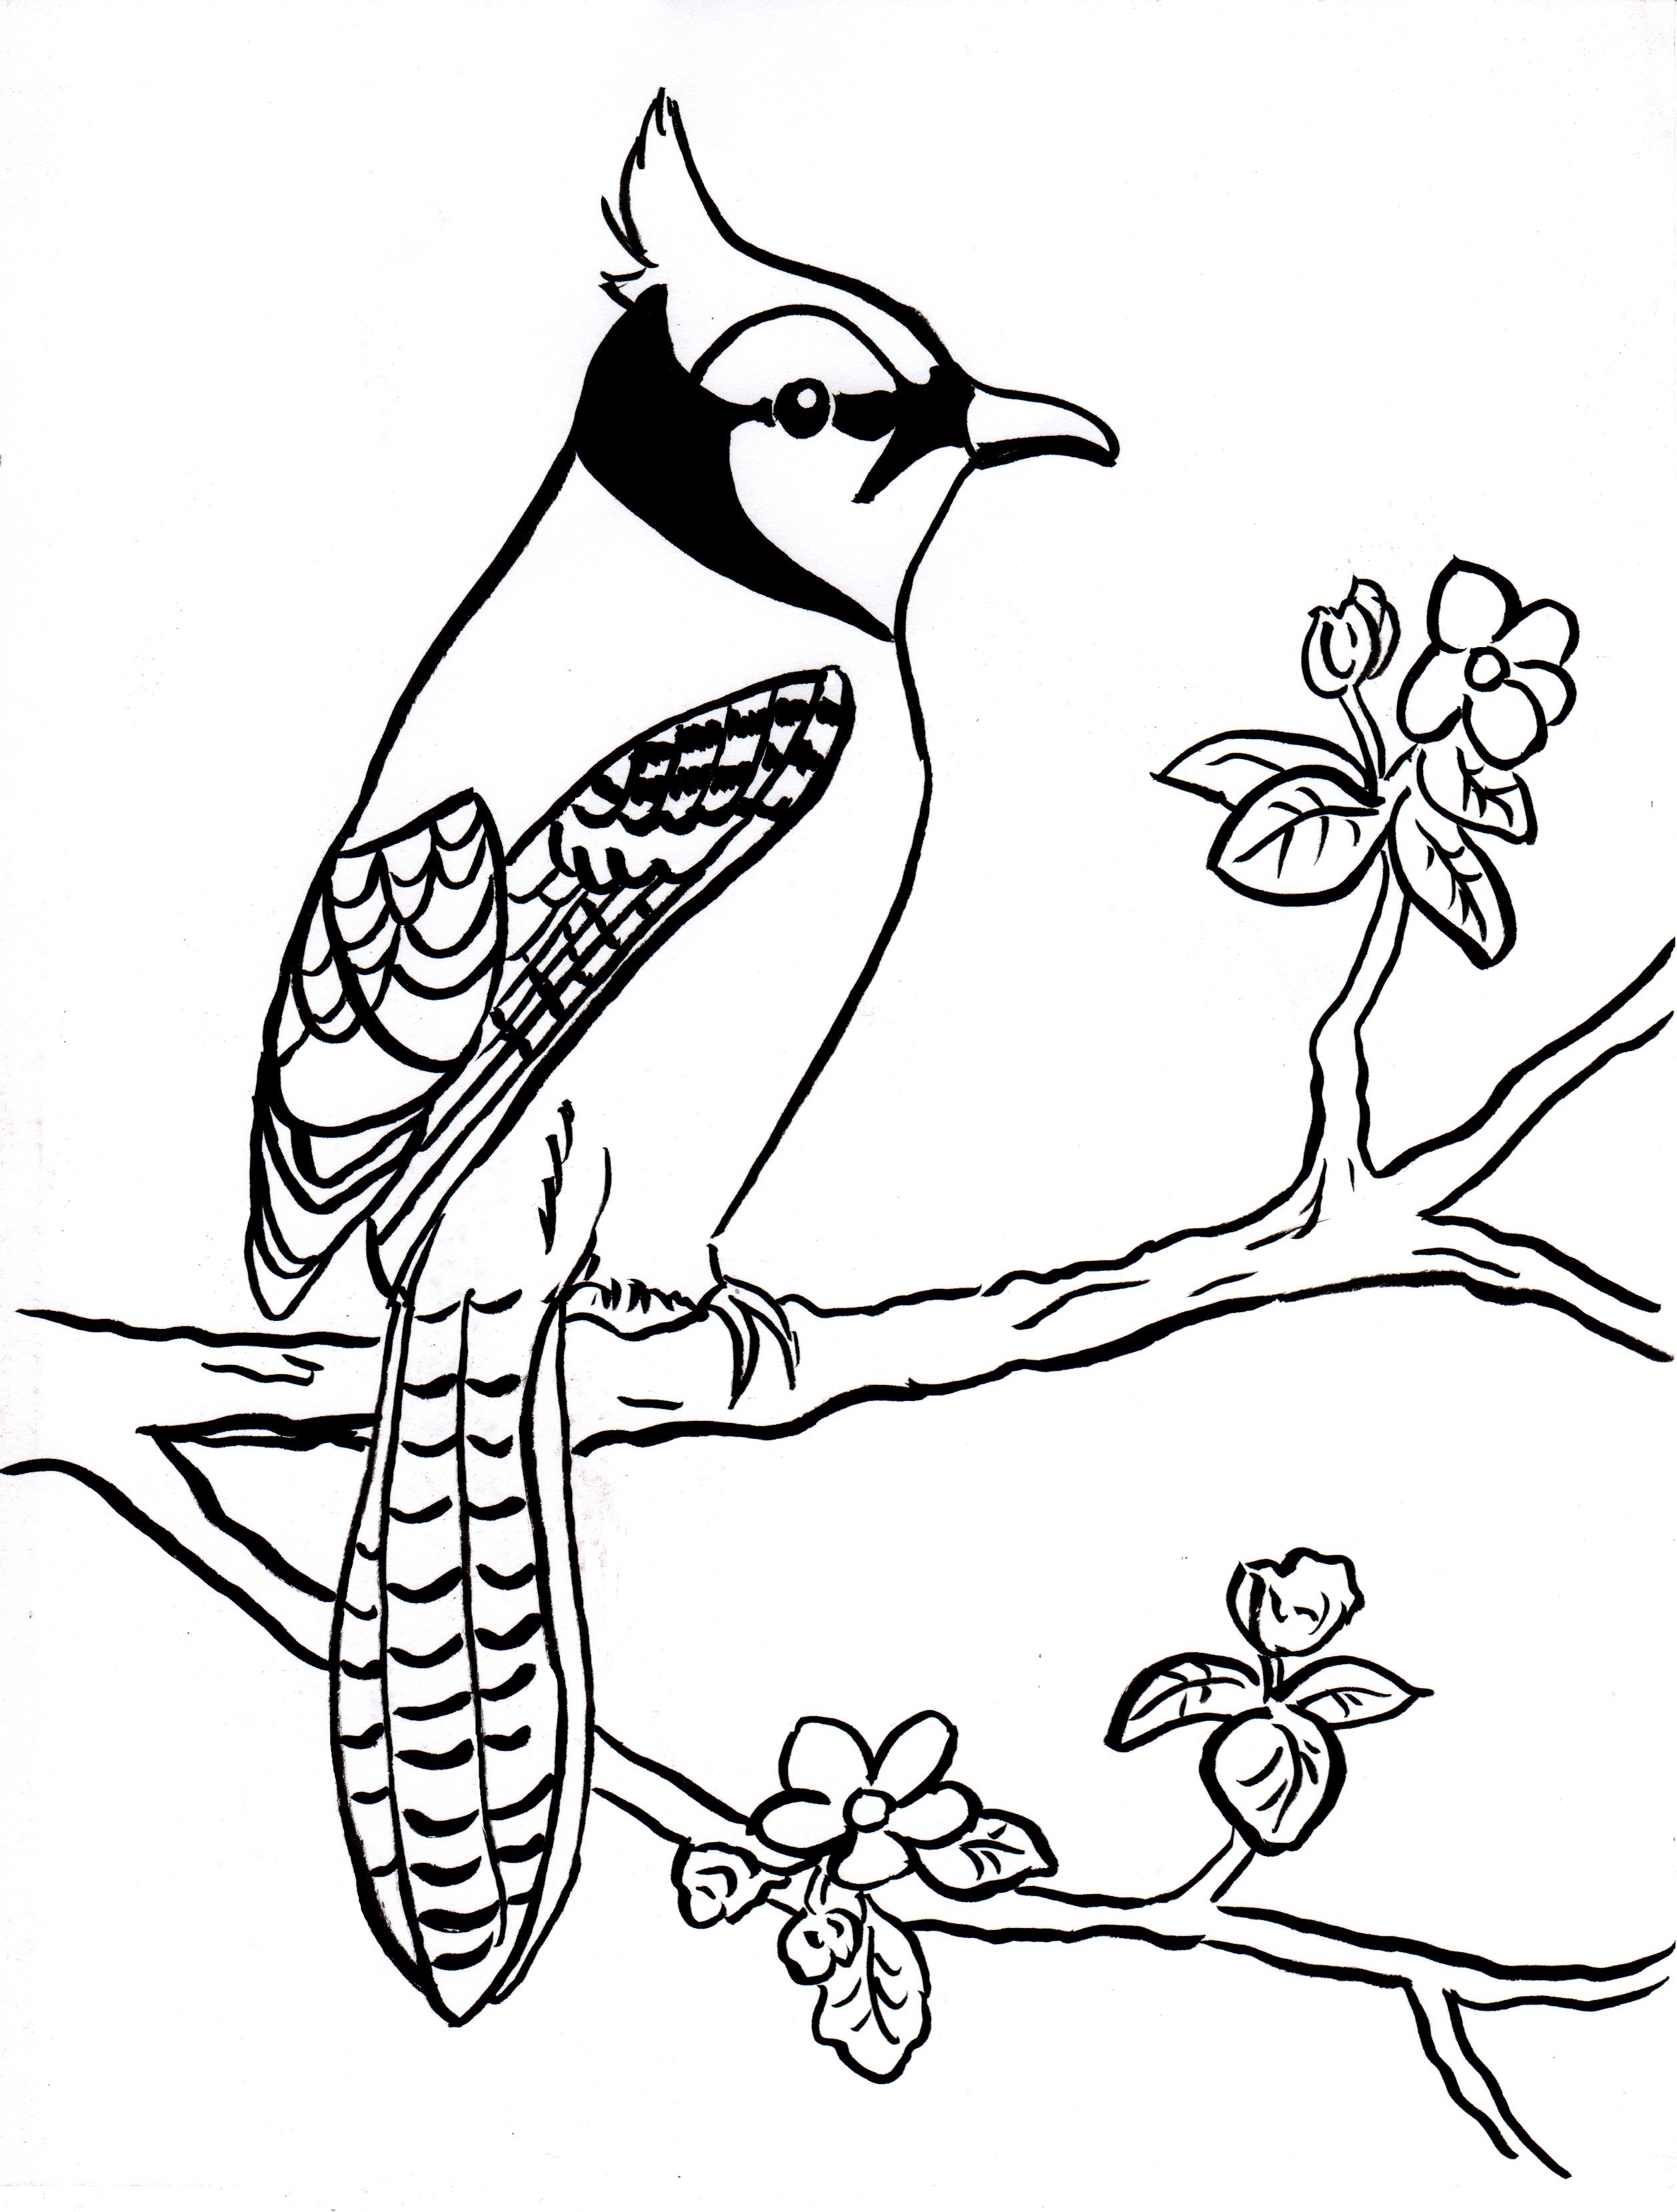 Blue Jay Coloring Page Samantha Bell